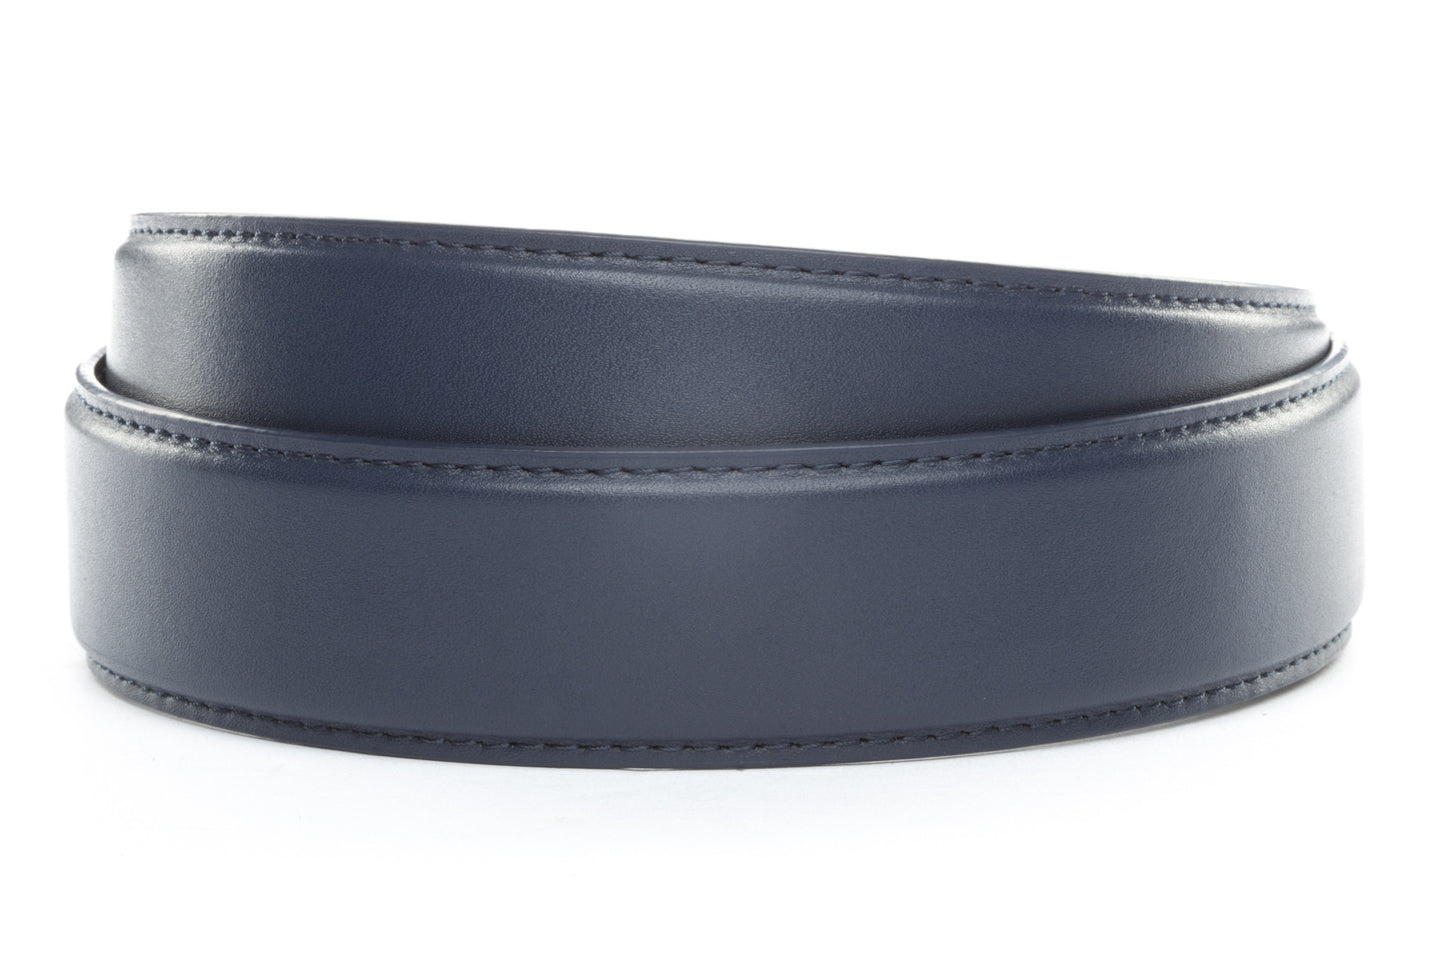 Men's leather belt strap in navy, 1.5 inches wide, formal look